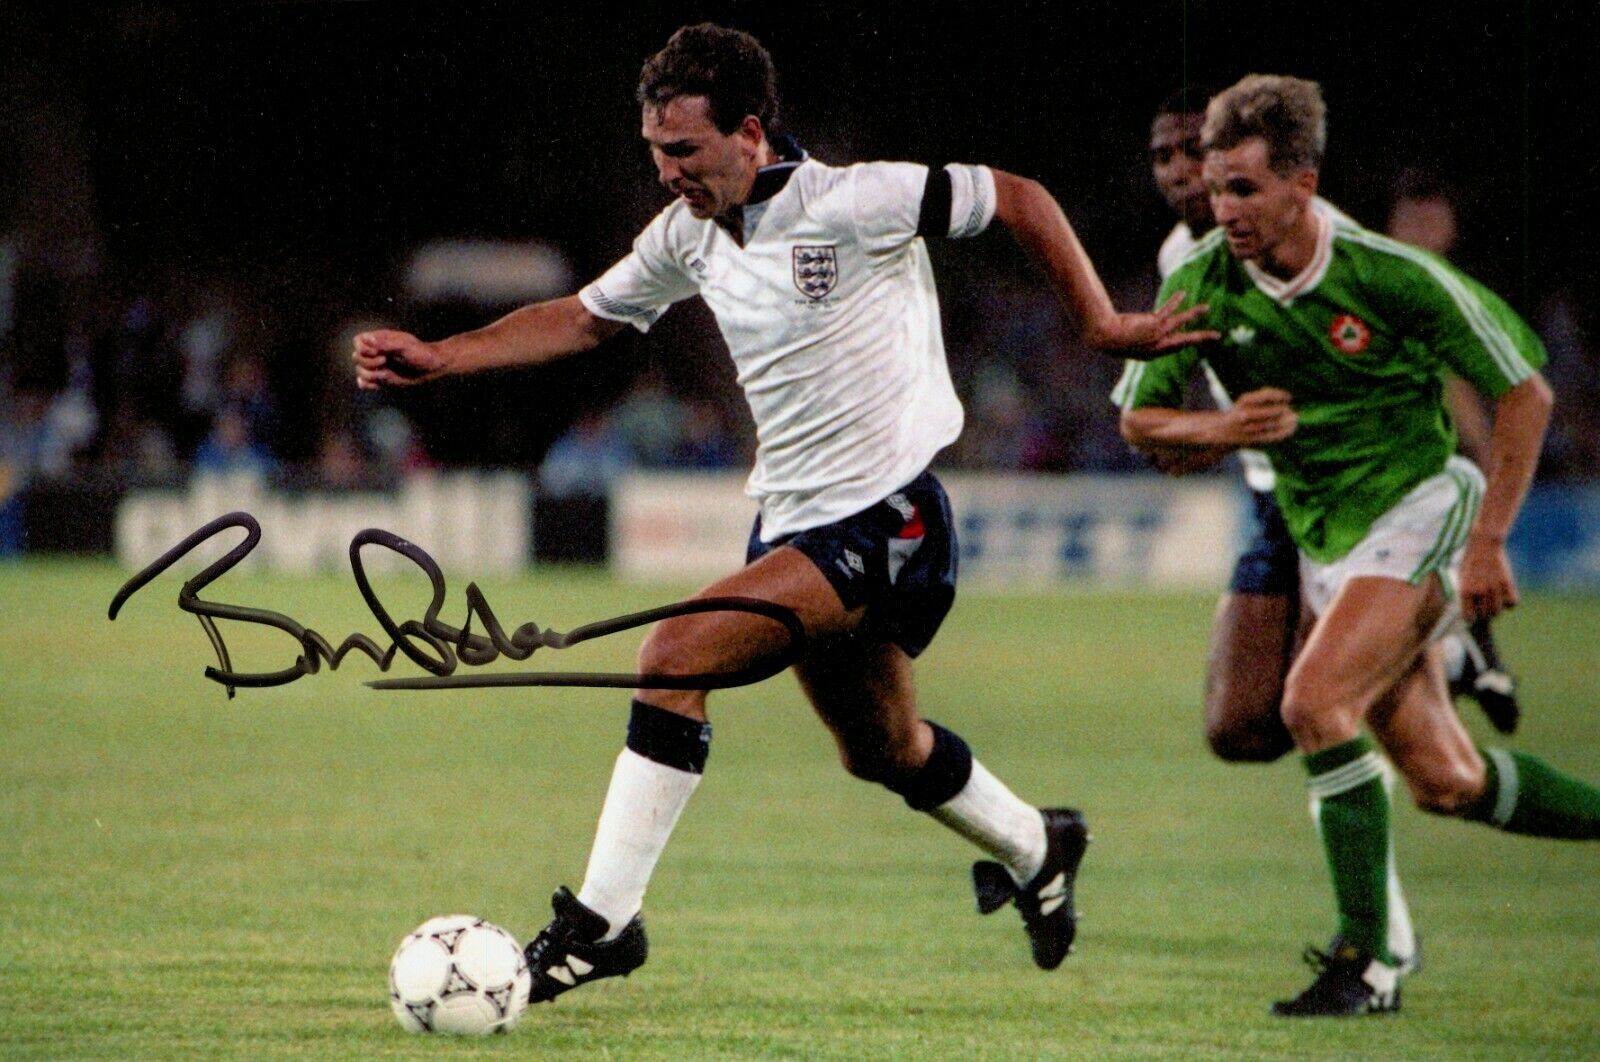 Bryan Robson Signed 6x4 Photo Poster painting England Manchester United Genuine Autograph + COA